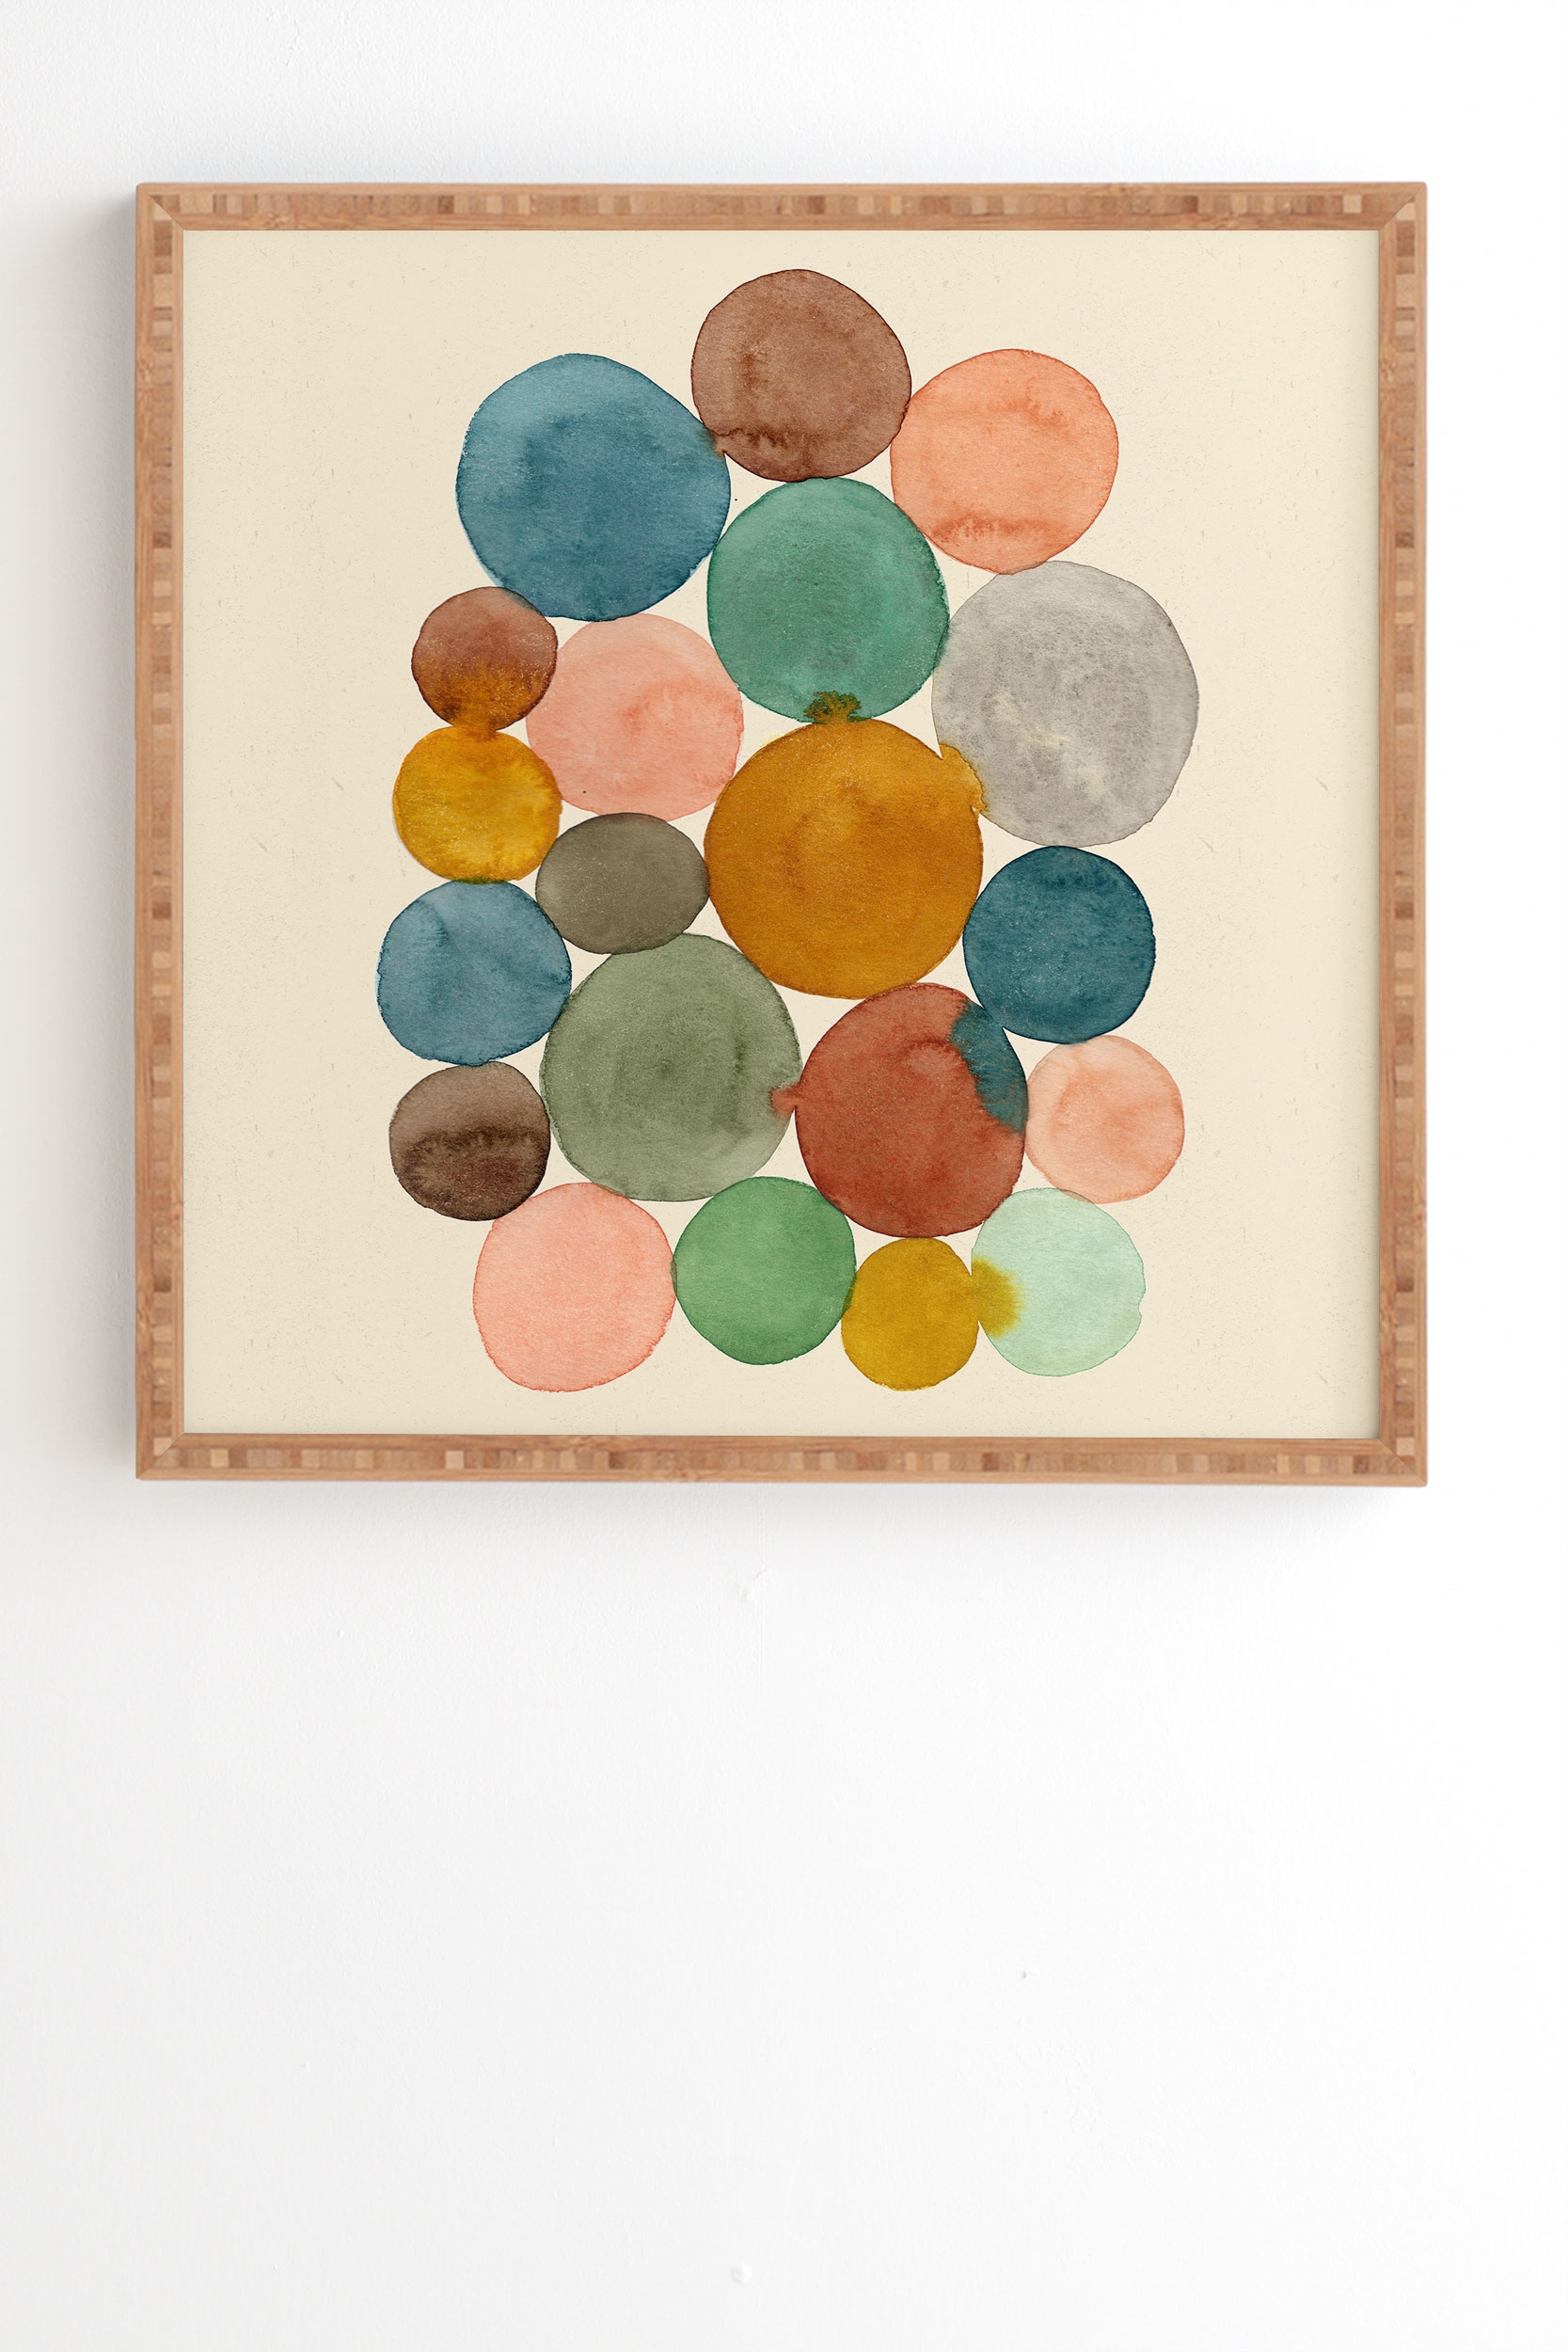 Connected Dots by Pauline Stanley - Framed Wall Art Bamboo 11" x 13" - Image 1